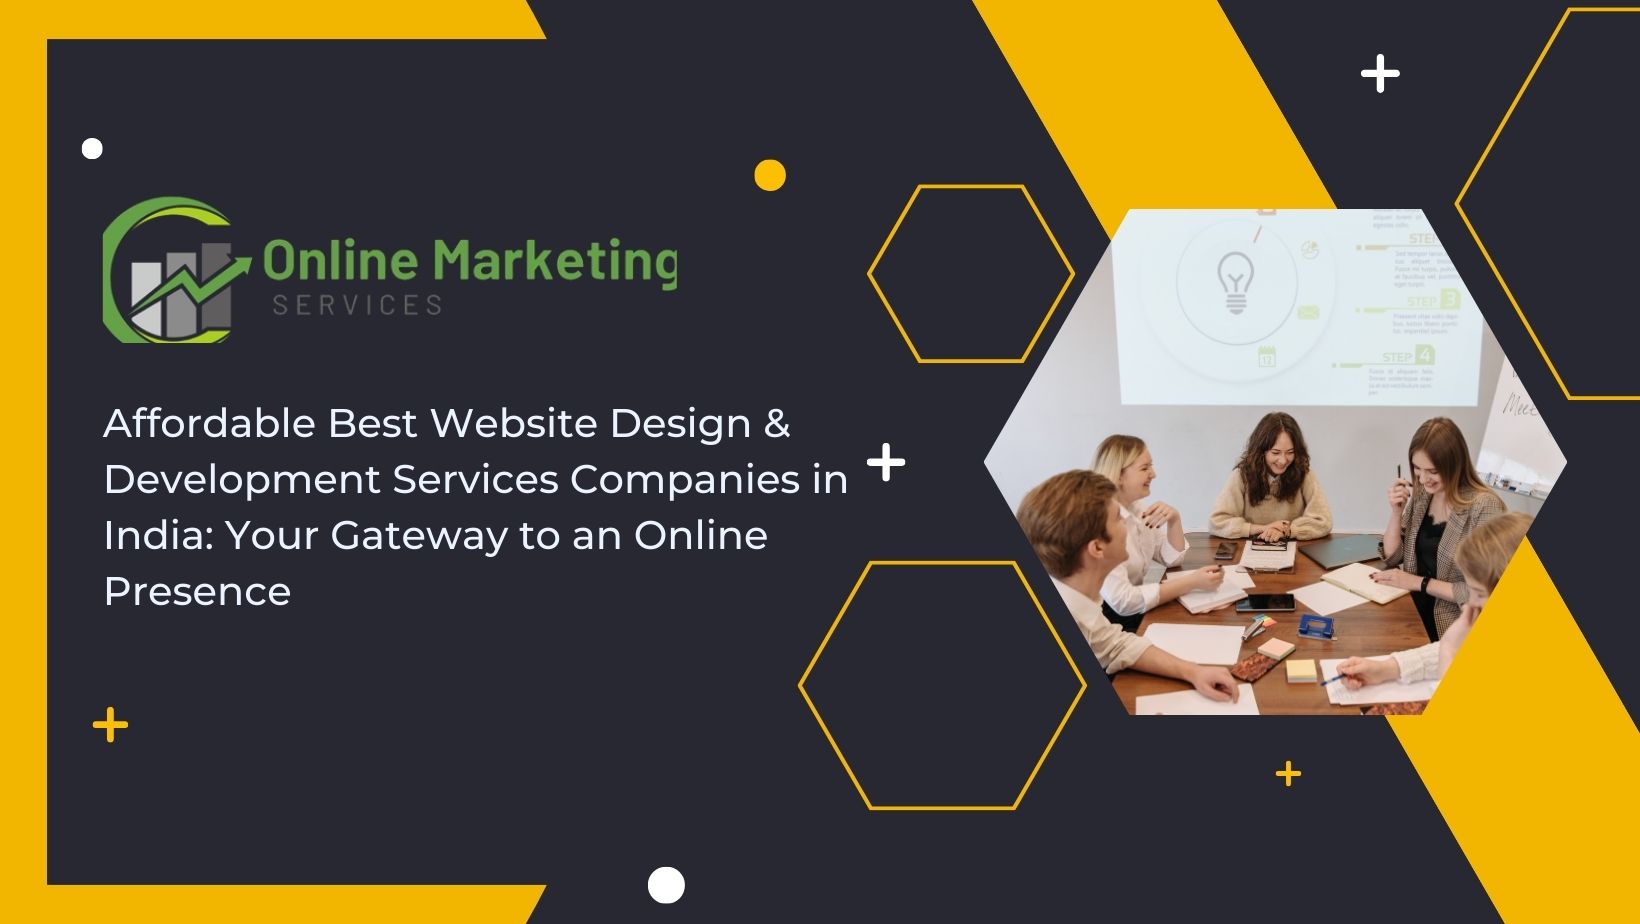 Affordable Best Website Design & Development Services Companies in India: Your Gateway to an Online Presence